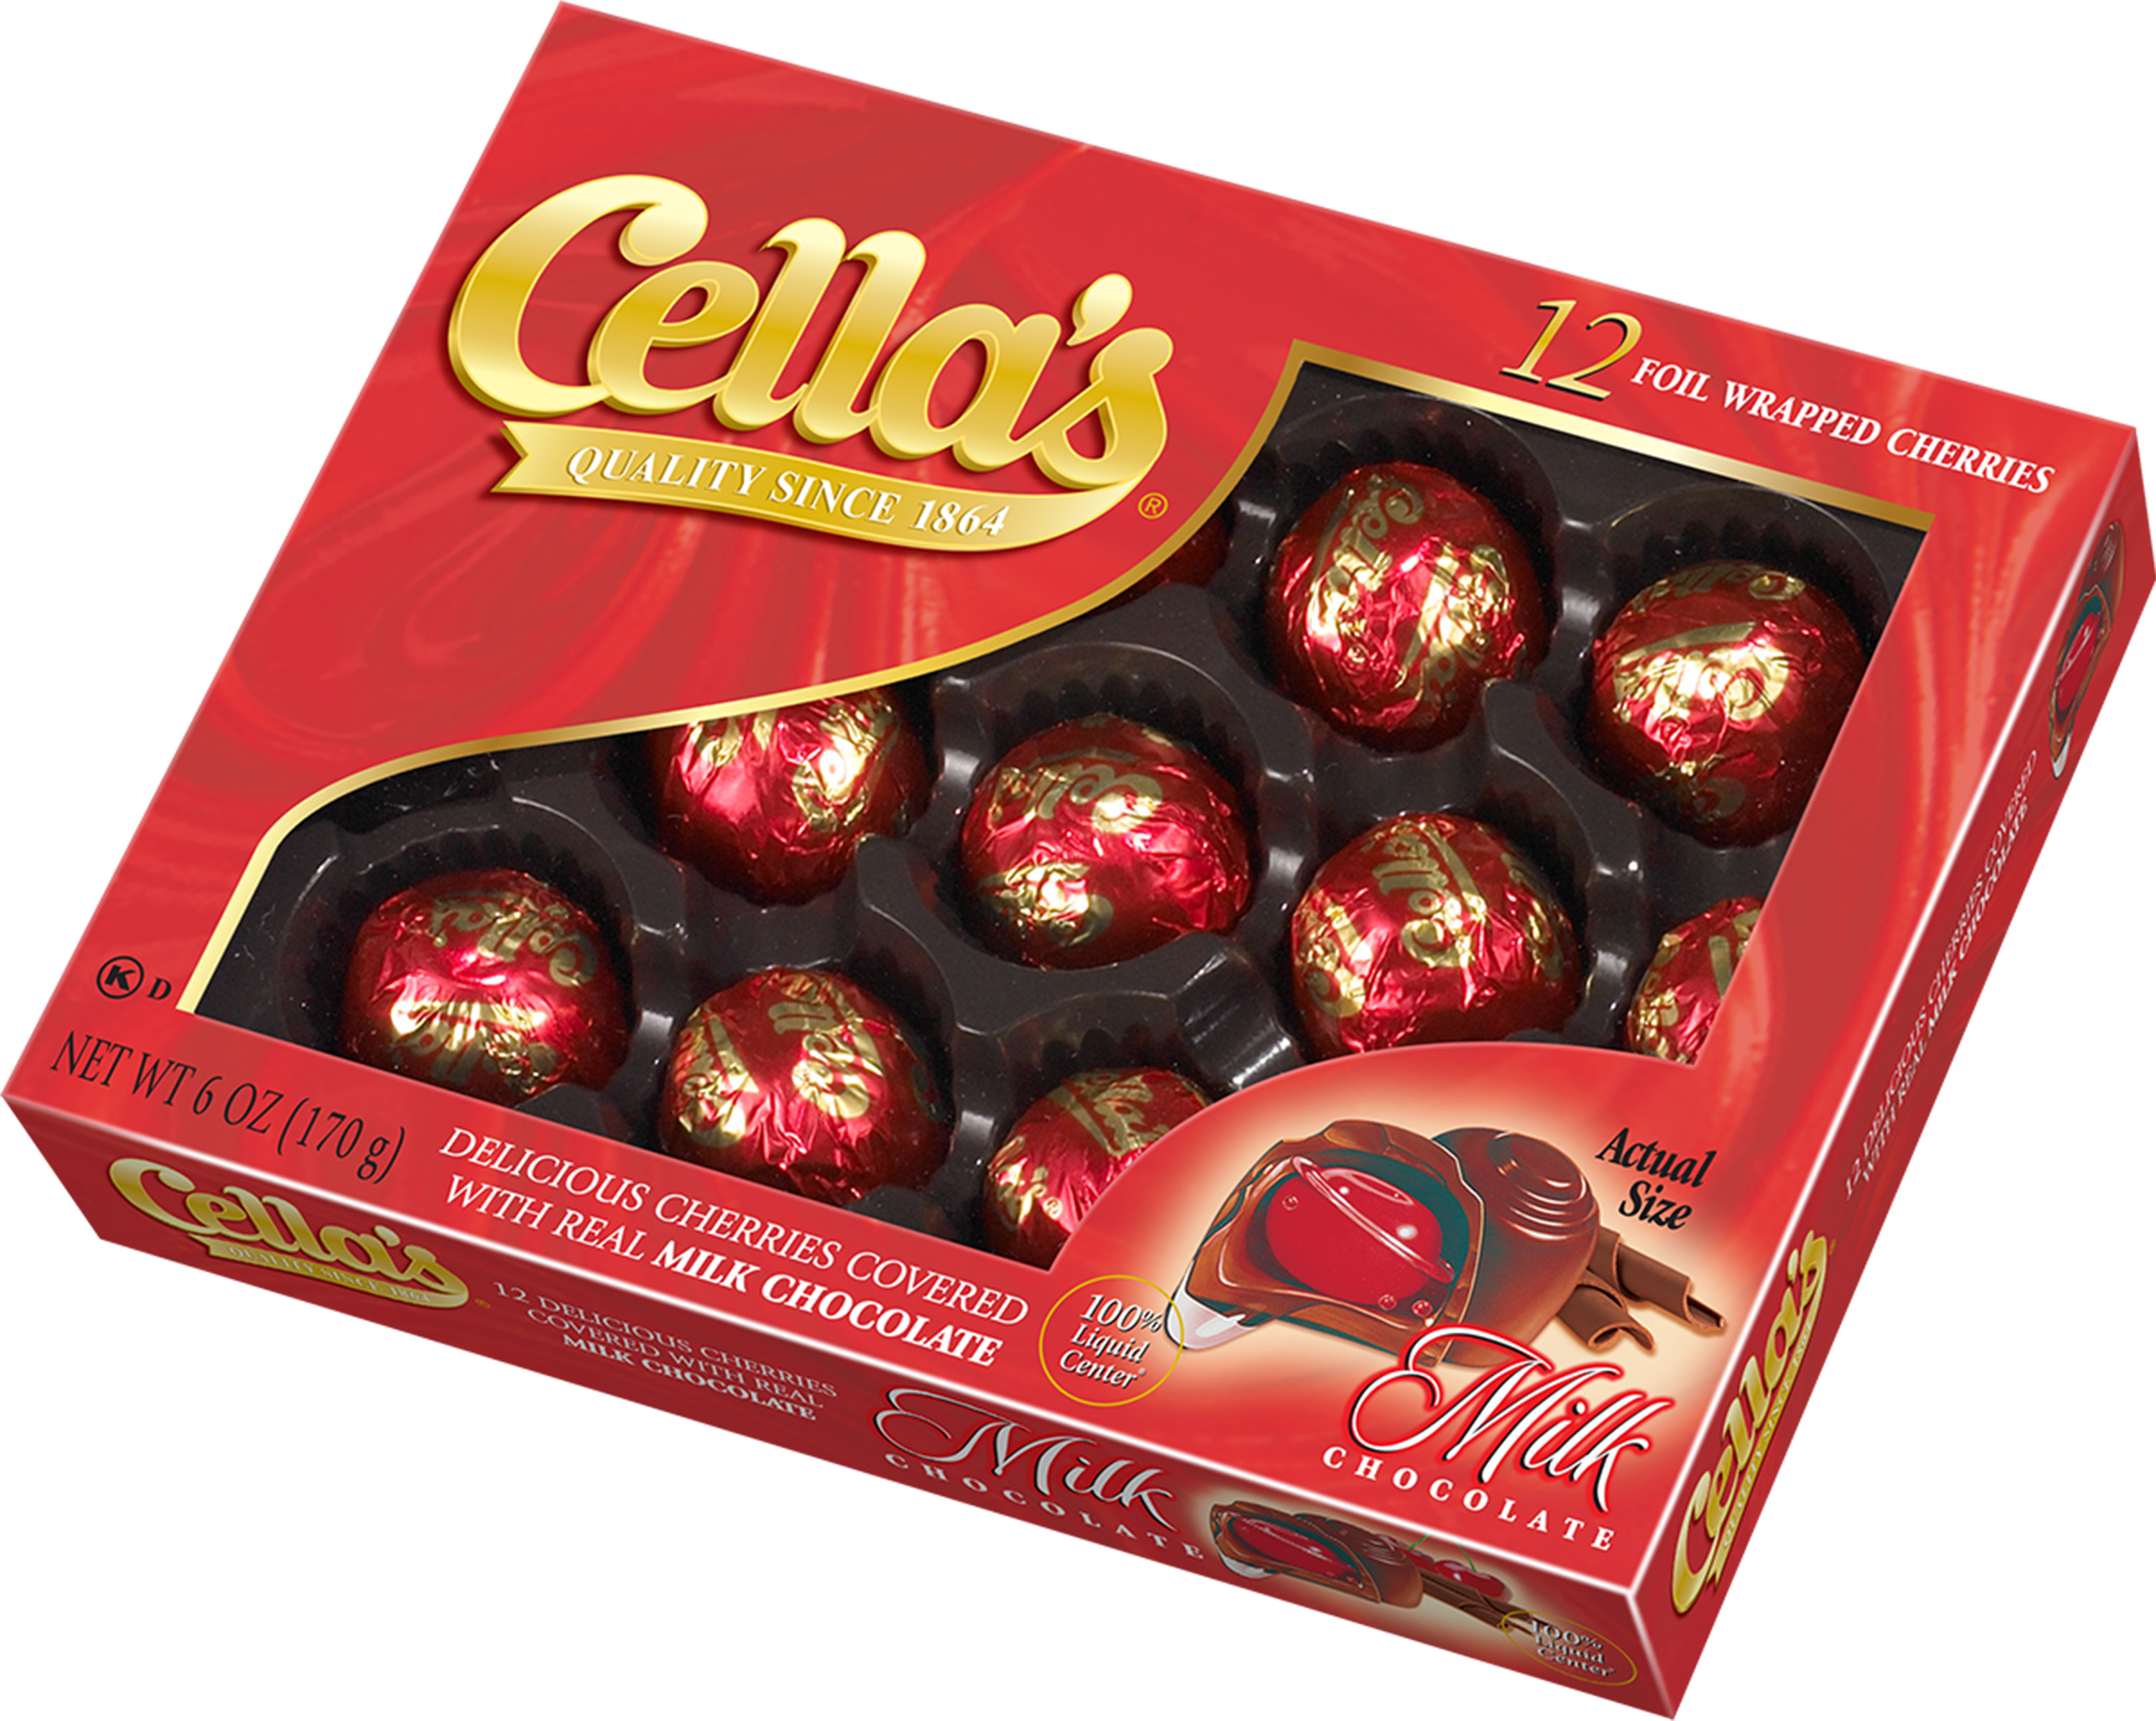 Cella's Holiday Milk Chocolate Covered Cherries , 6 oz, 12 Count - image 2 of 9